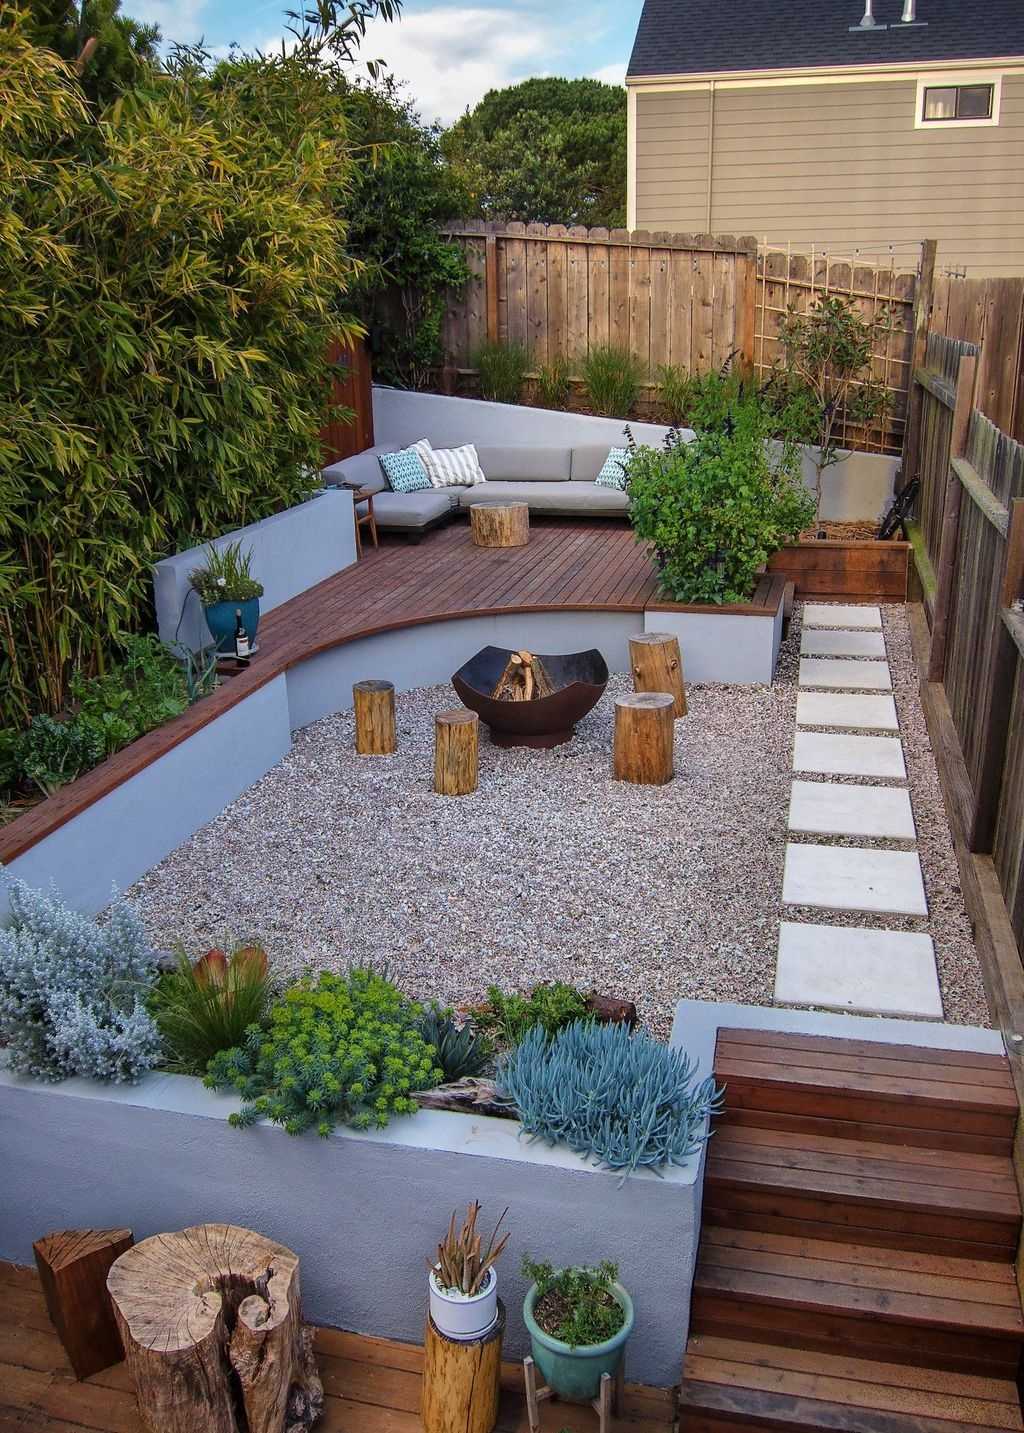 20 Small Space Landscaping Ideas To Make The Most Of Your Plot